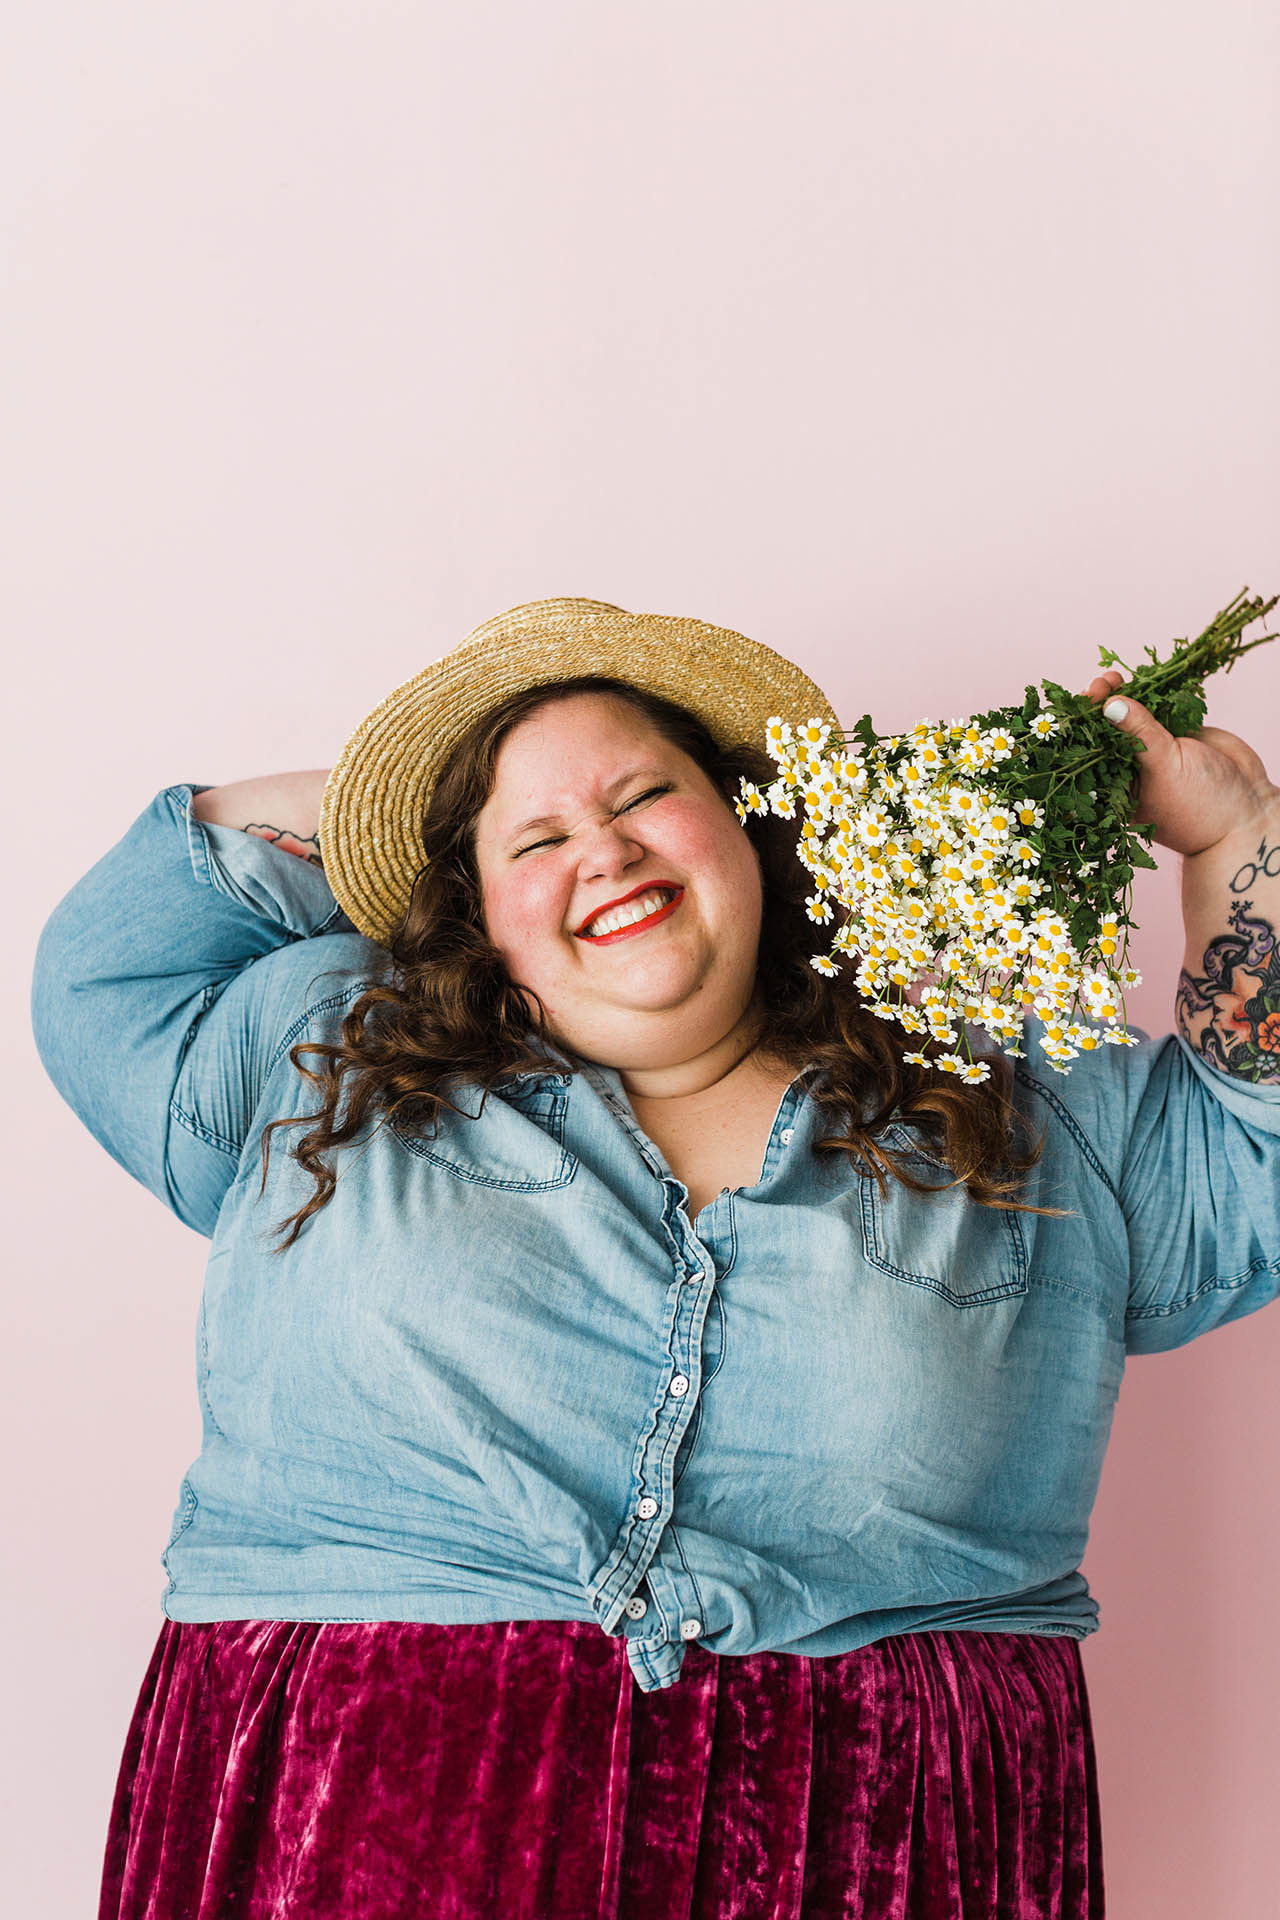 Plus size photography; a woman wearing a straw hat and a denim shirt smiling with closed eyes and holding a bouquet of flowers up to her face in front of a light pink background